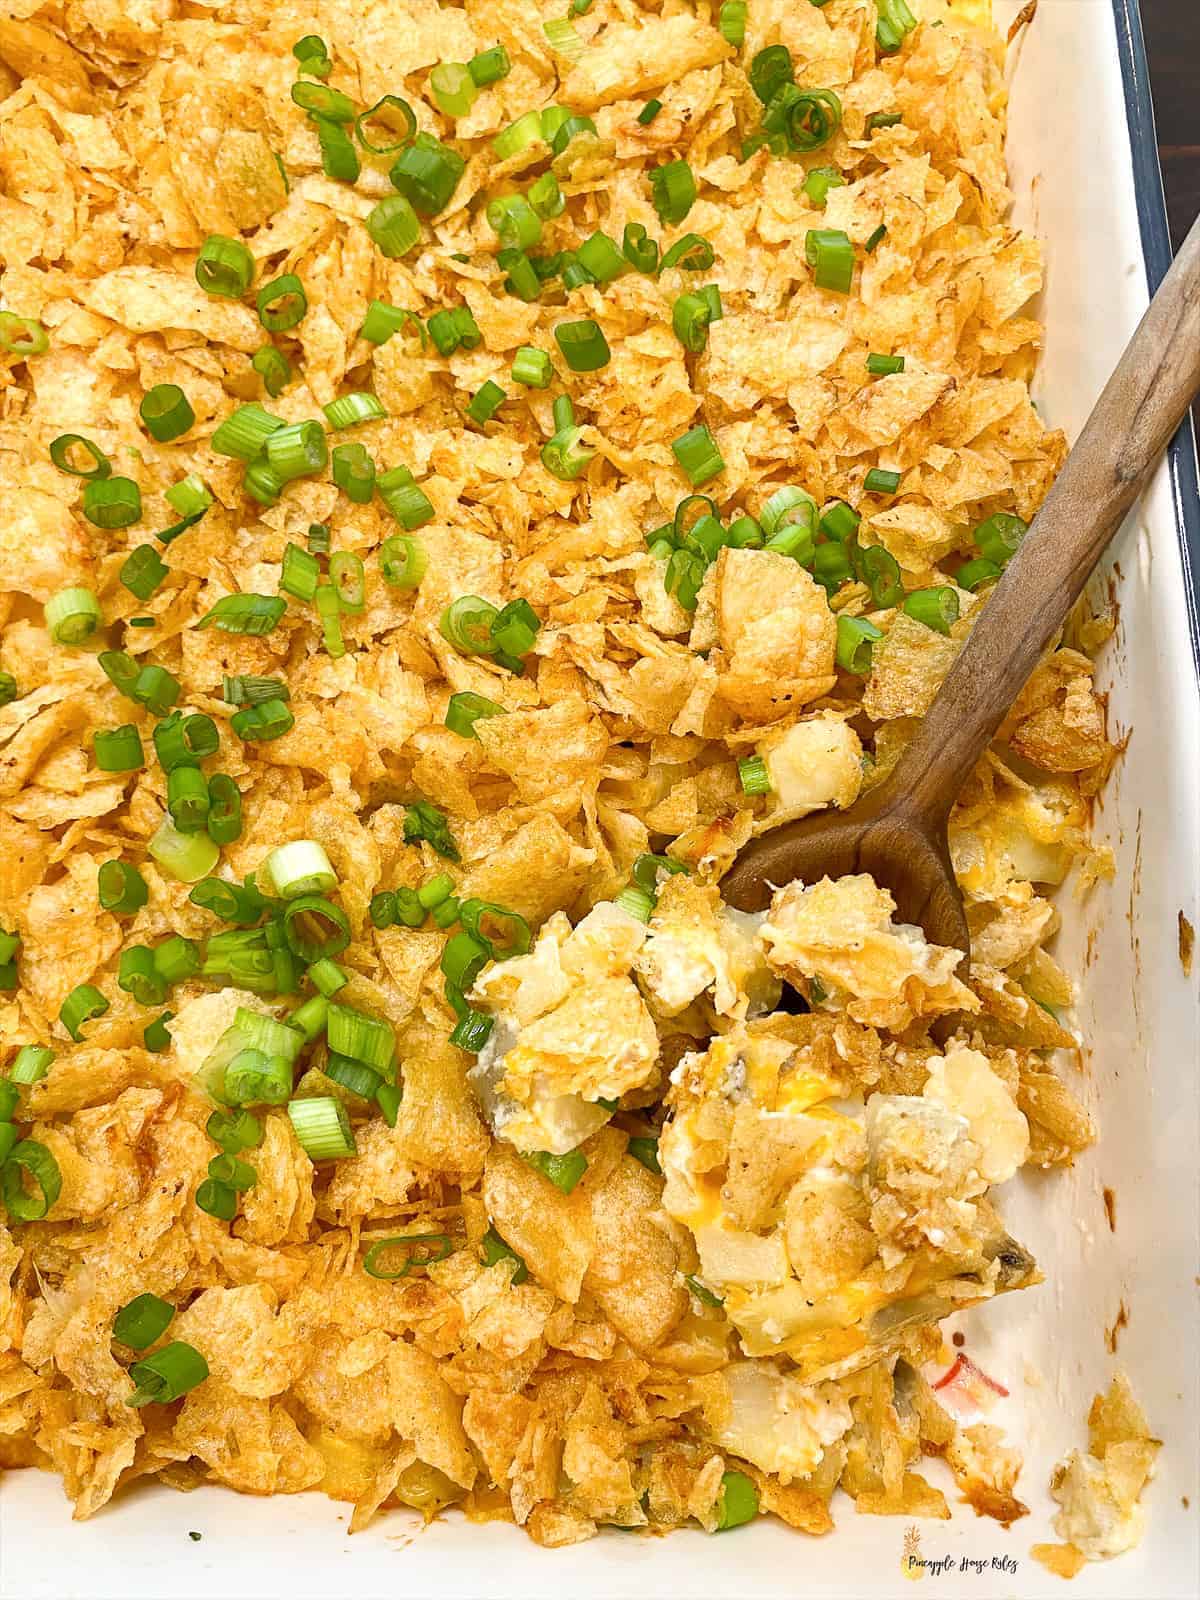 Funeral Potatoes | Funeral Potatoes with Hash Browns | Funeral Potatoes Recipe | Funeral Potatoes Easy | Buffet Potatoes | Buffet Potatoes Recipe | Buffet Potato Casserole | Pot Luck Dishes | Pot Luck Dishes for a Crowd | Pot Luck Ideas | Easter Side Dishes | Easter Sides | Easter Sides Ideas | Side Dishes | Side Dish Recipes Easy | Side Dish Recipes | Hashbrown Casserole | Hashbrown Casserole Easy